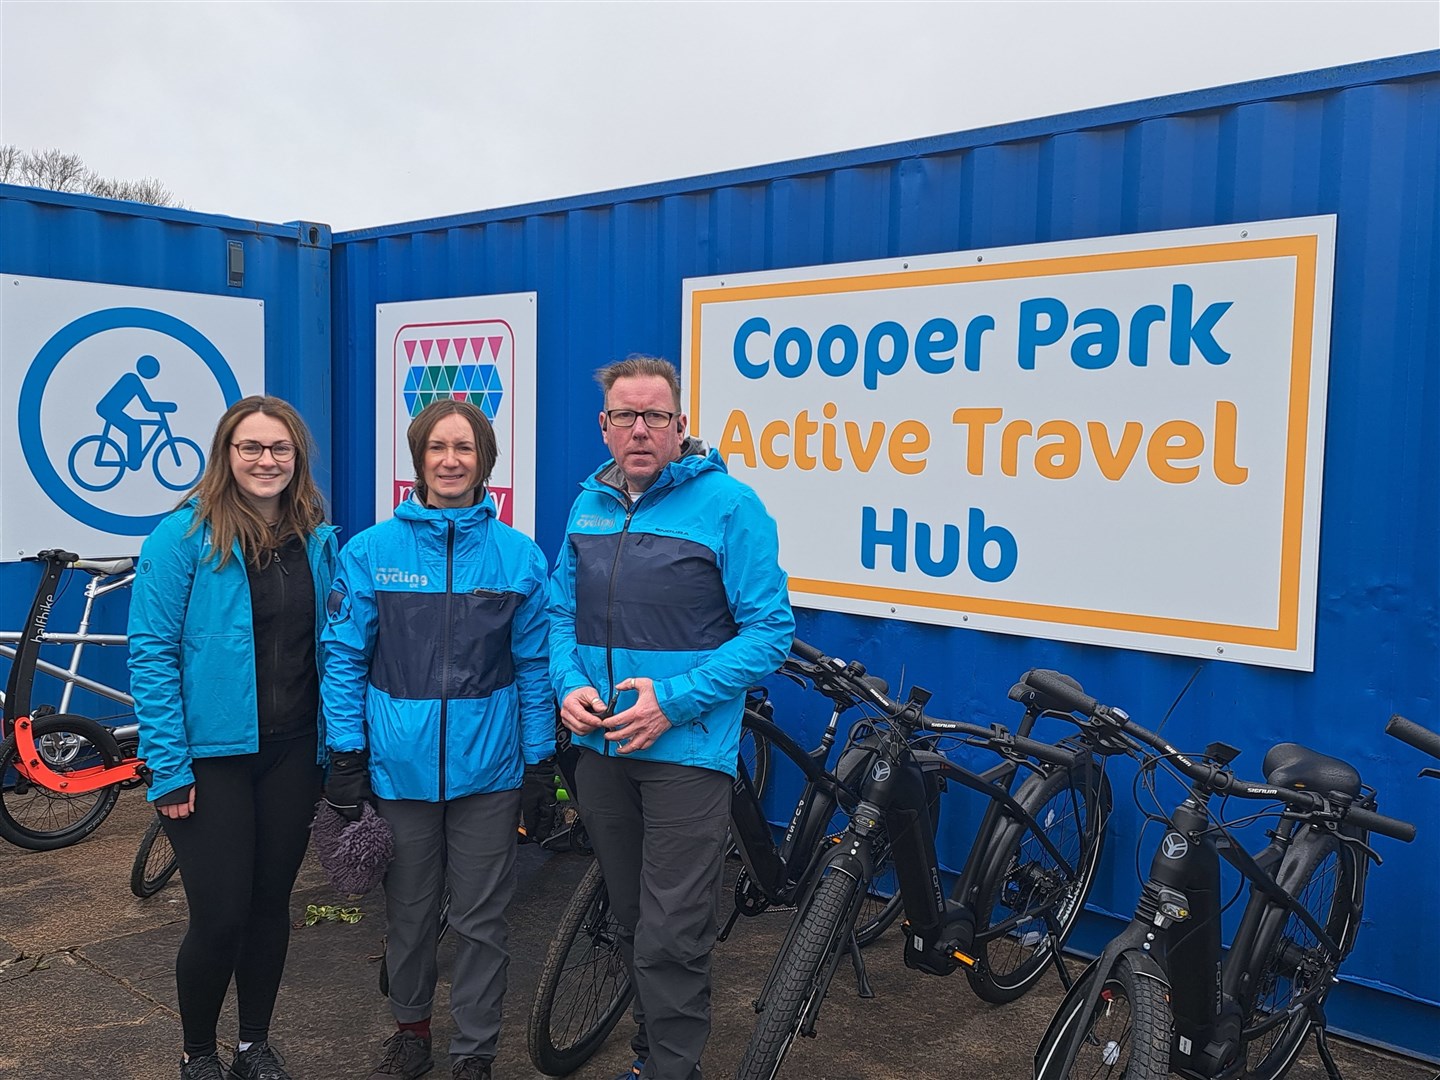 Left to right: Emily Farquhar and Suzanne Forup and Iain Bamber of Cycling UK at the travel hub.